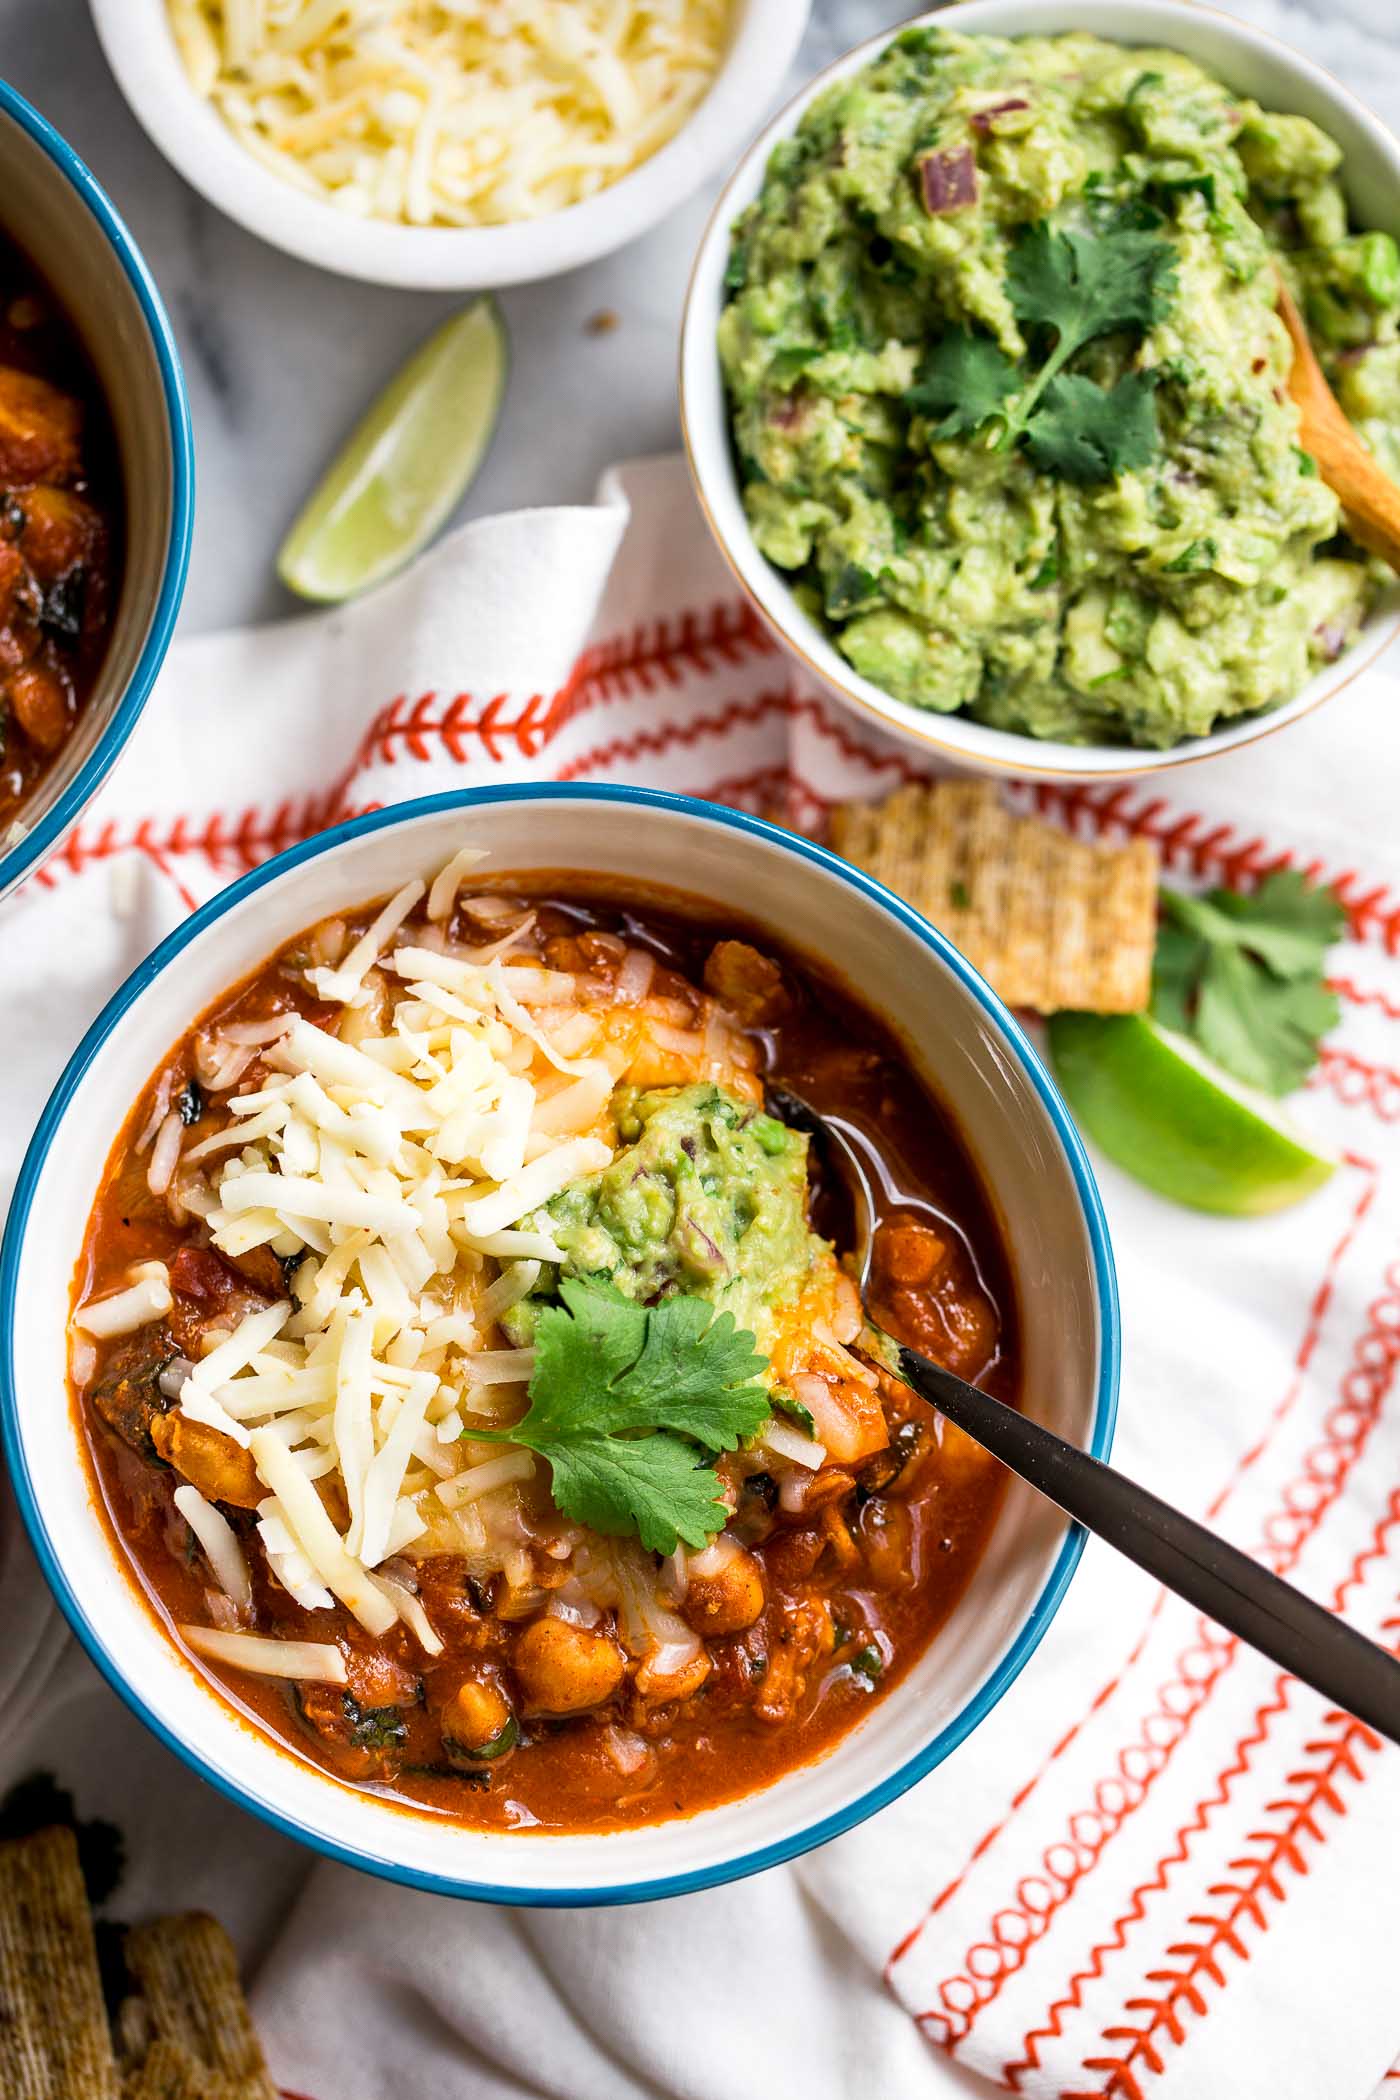 chipotle turkey chili is healthy, comforting, & full of modern flare - smoky heat of chipotle peppers, sweet bites of sweet potato, nutrient-dense kale, & a little touch of cinnamon for some warmth. the perfect cozy comfort food dinner to use up thanksgiving leftovers! #playswellwithbutter #chilirecipe #turkey #comfortfood #thanksgivingleftovers #leftoverturkey